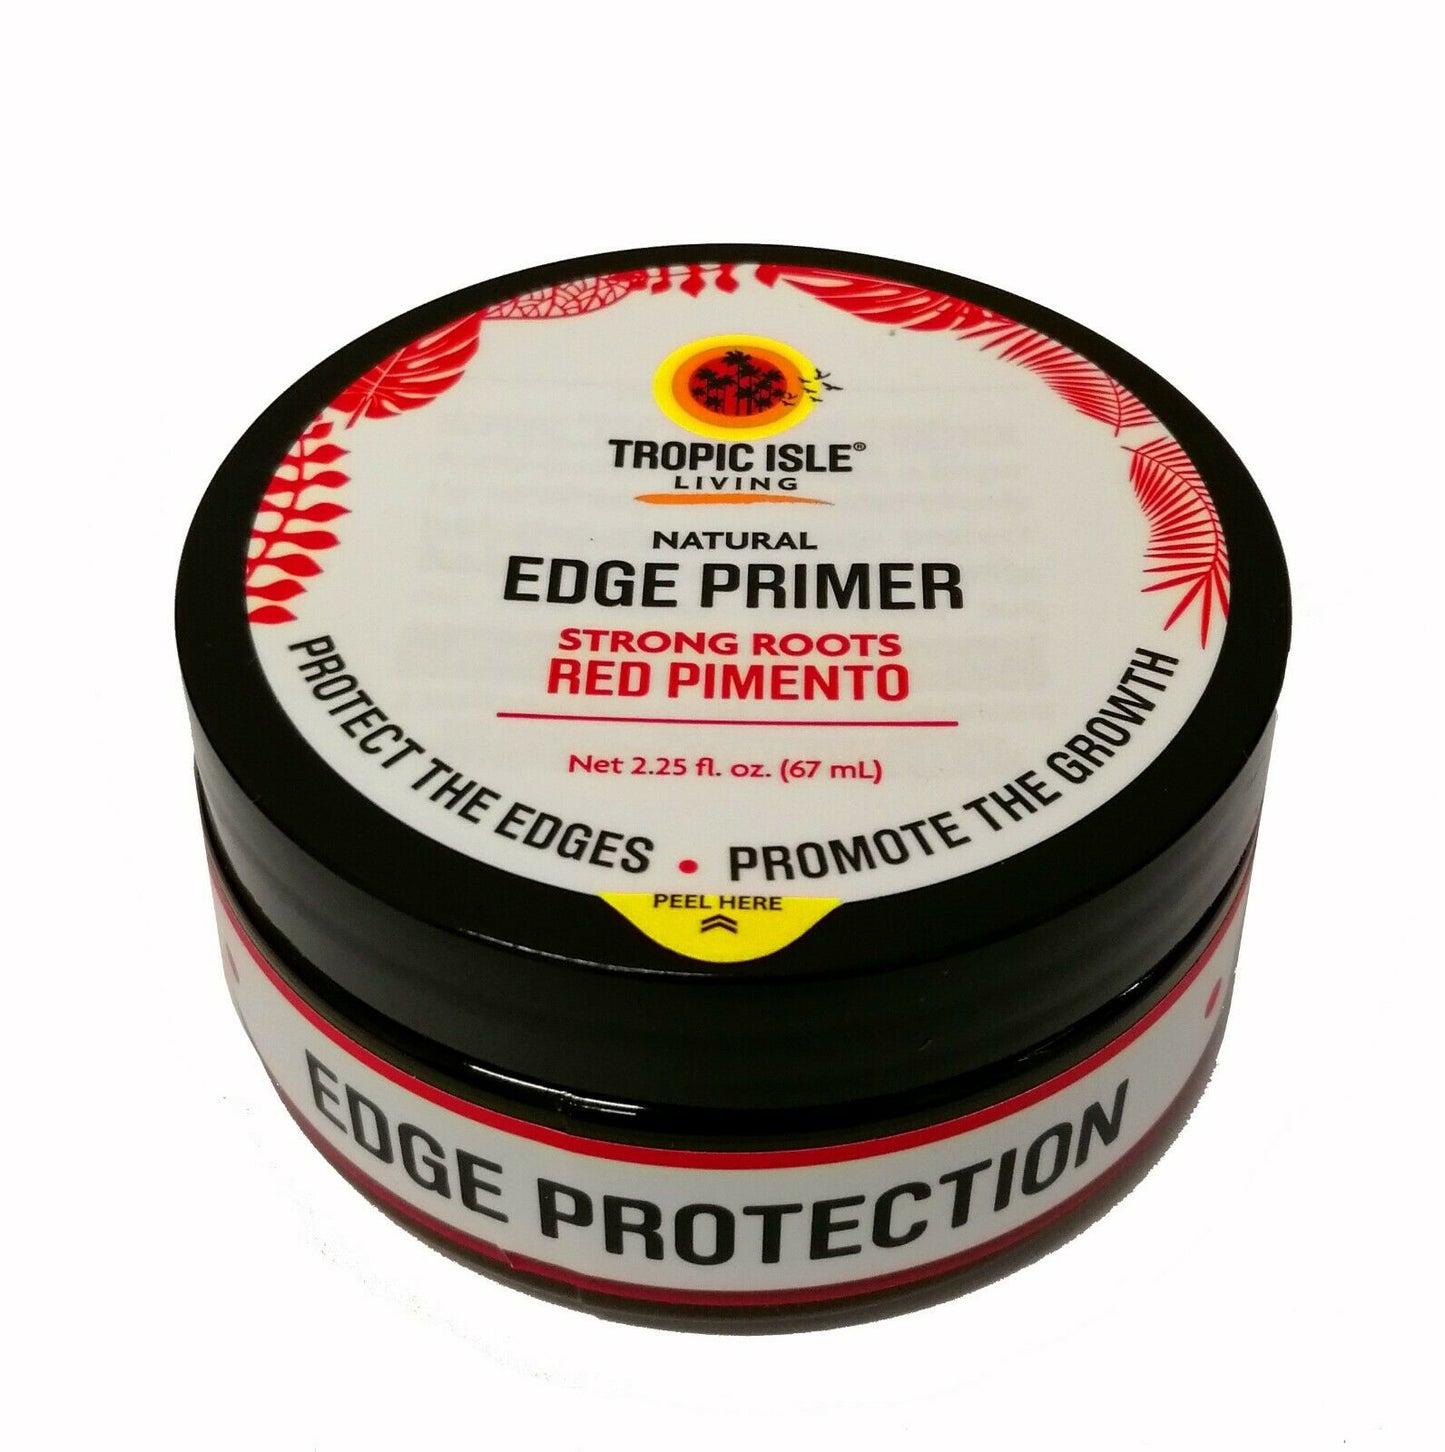 Tropic Isle Living Natural Edge Primer Strong Roots Red Pimento, 2.25 fl.oz / 67ml